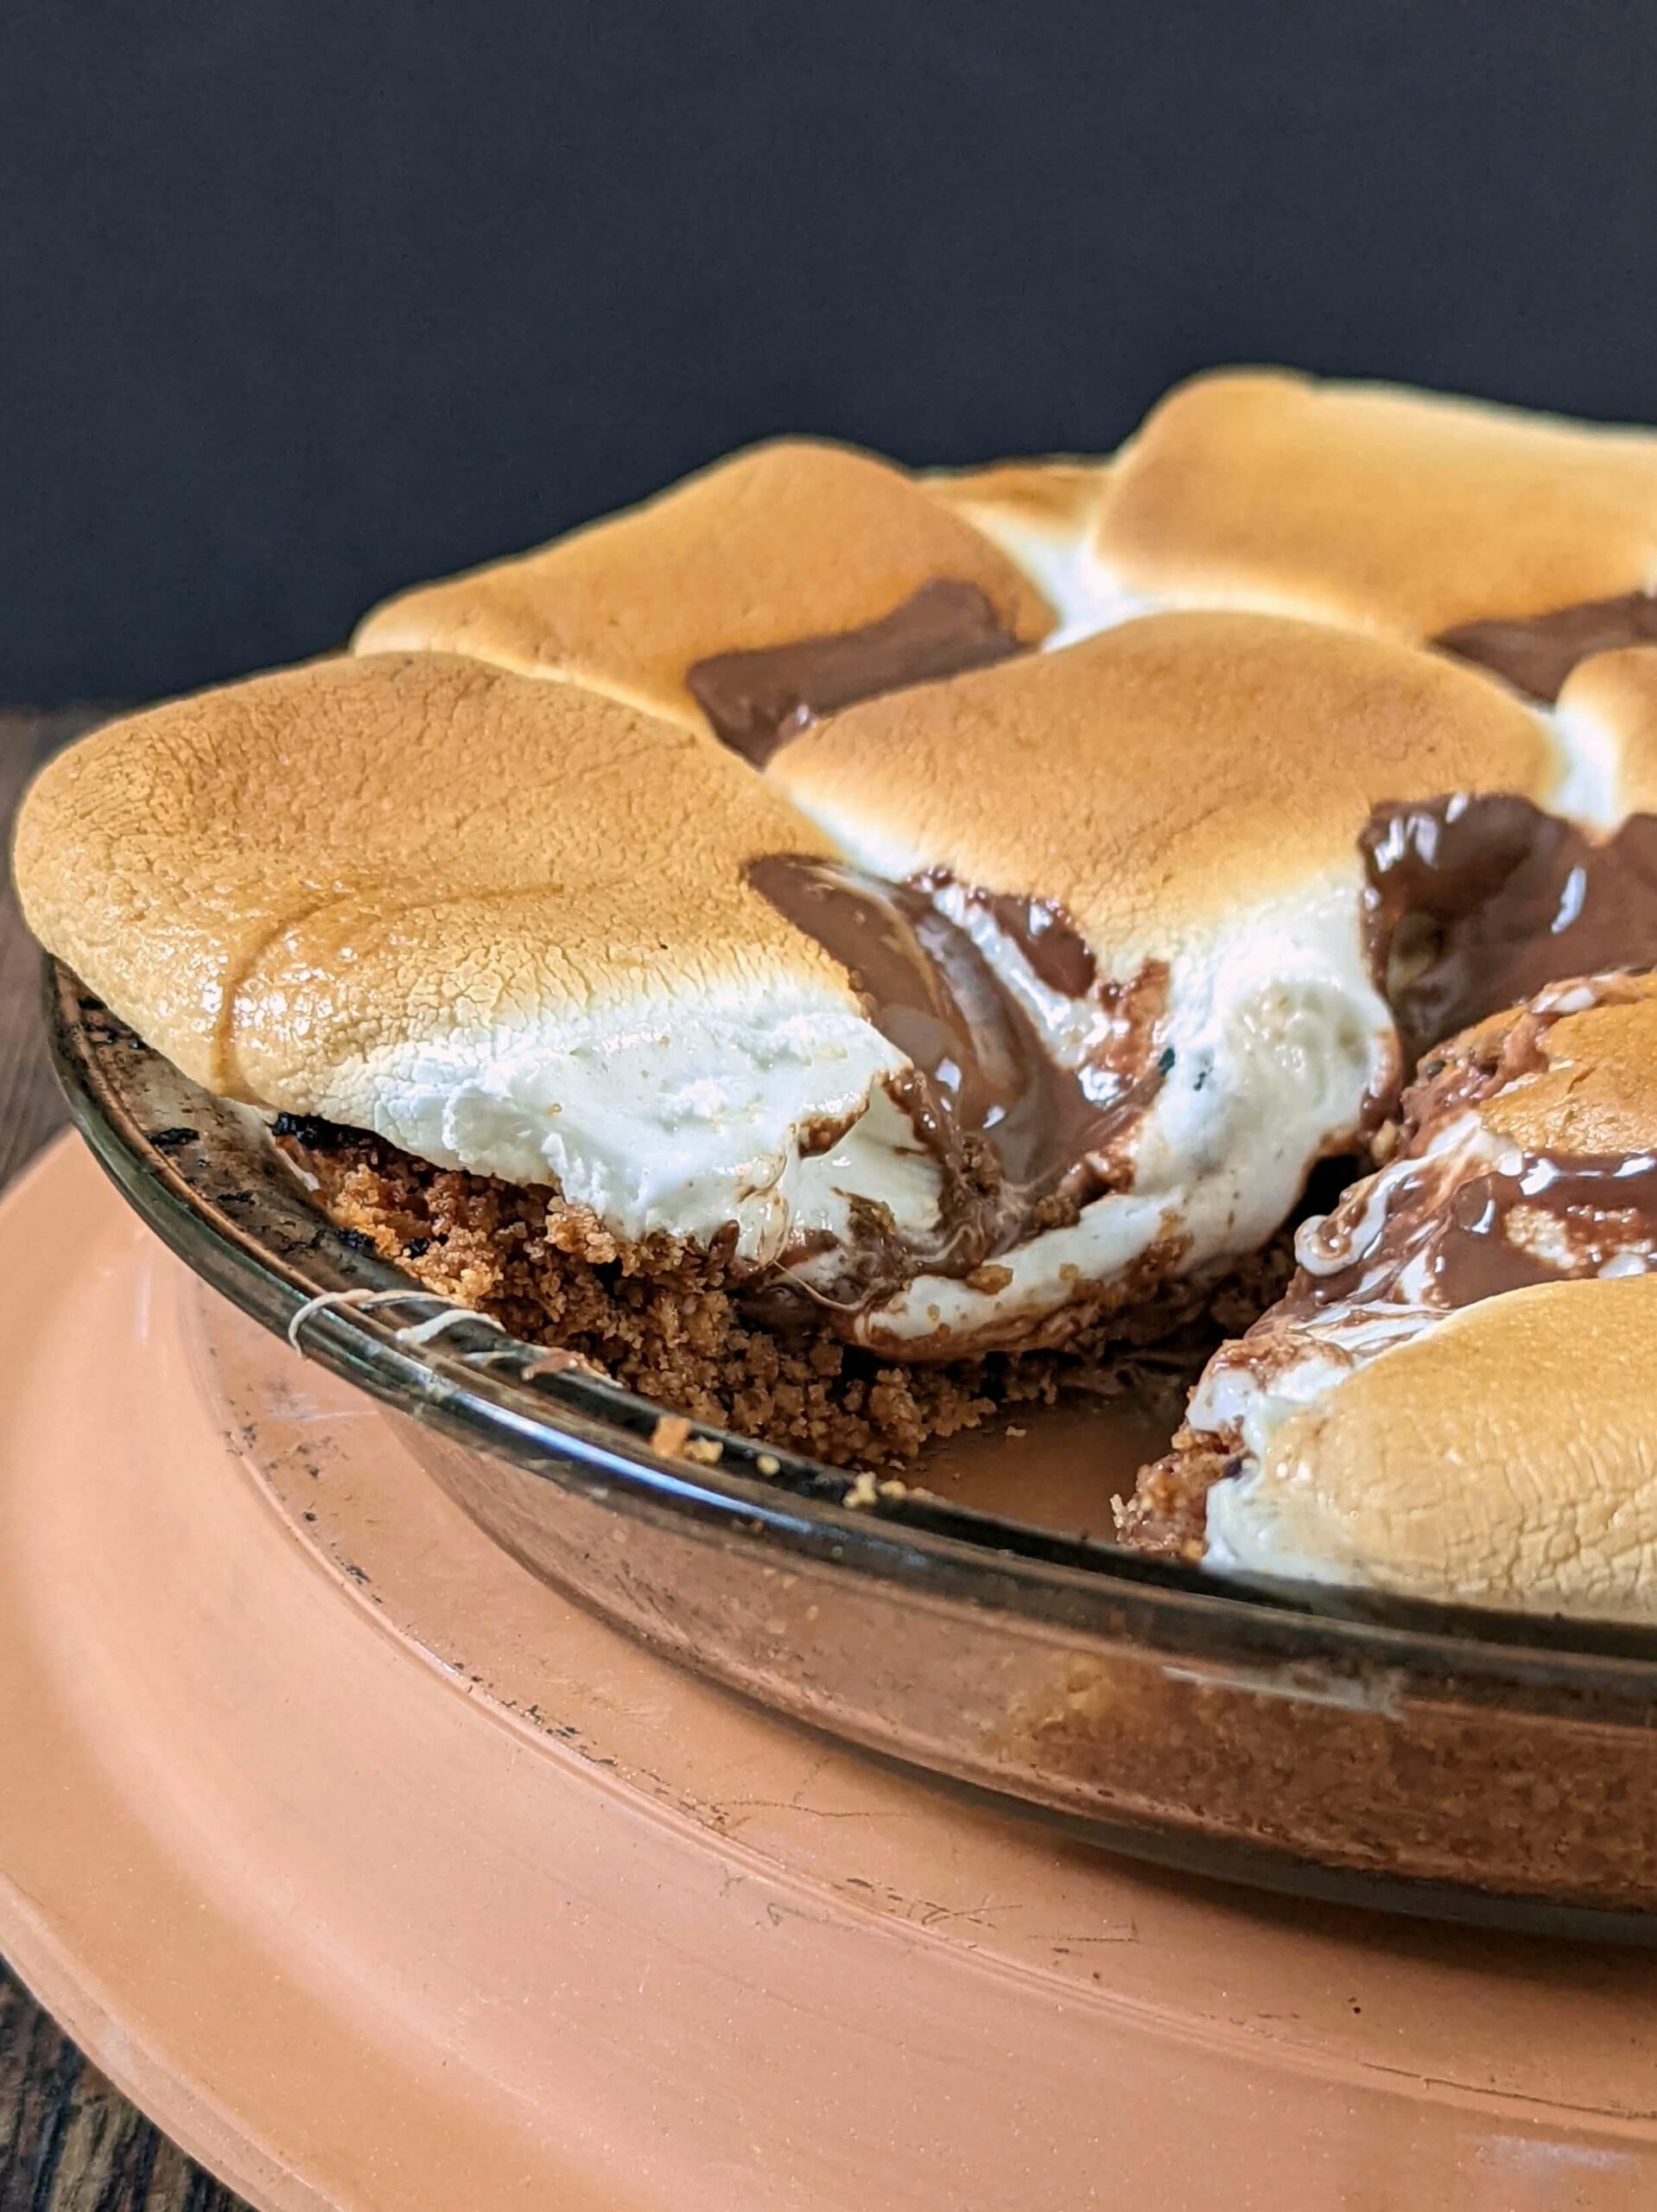 A full pan of smores pie ready to serve with one slice missing.